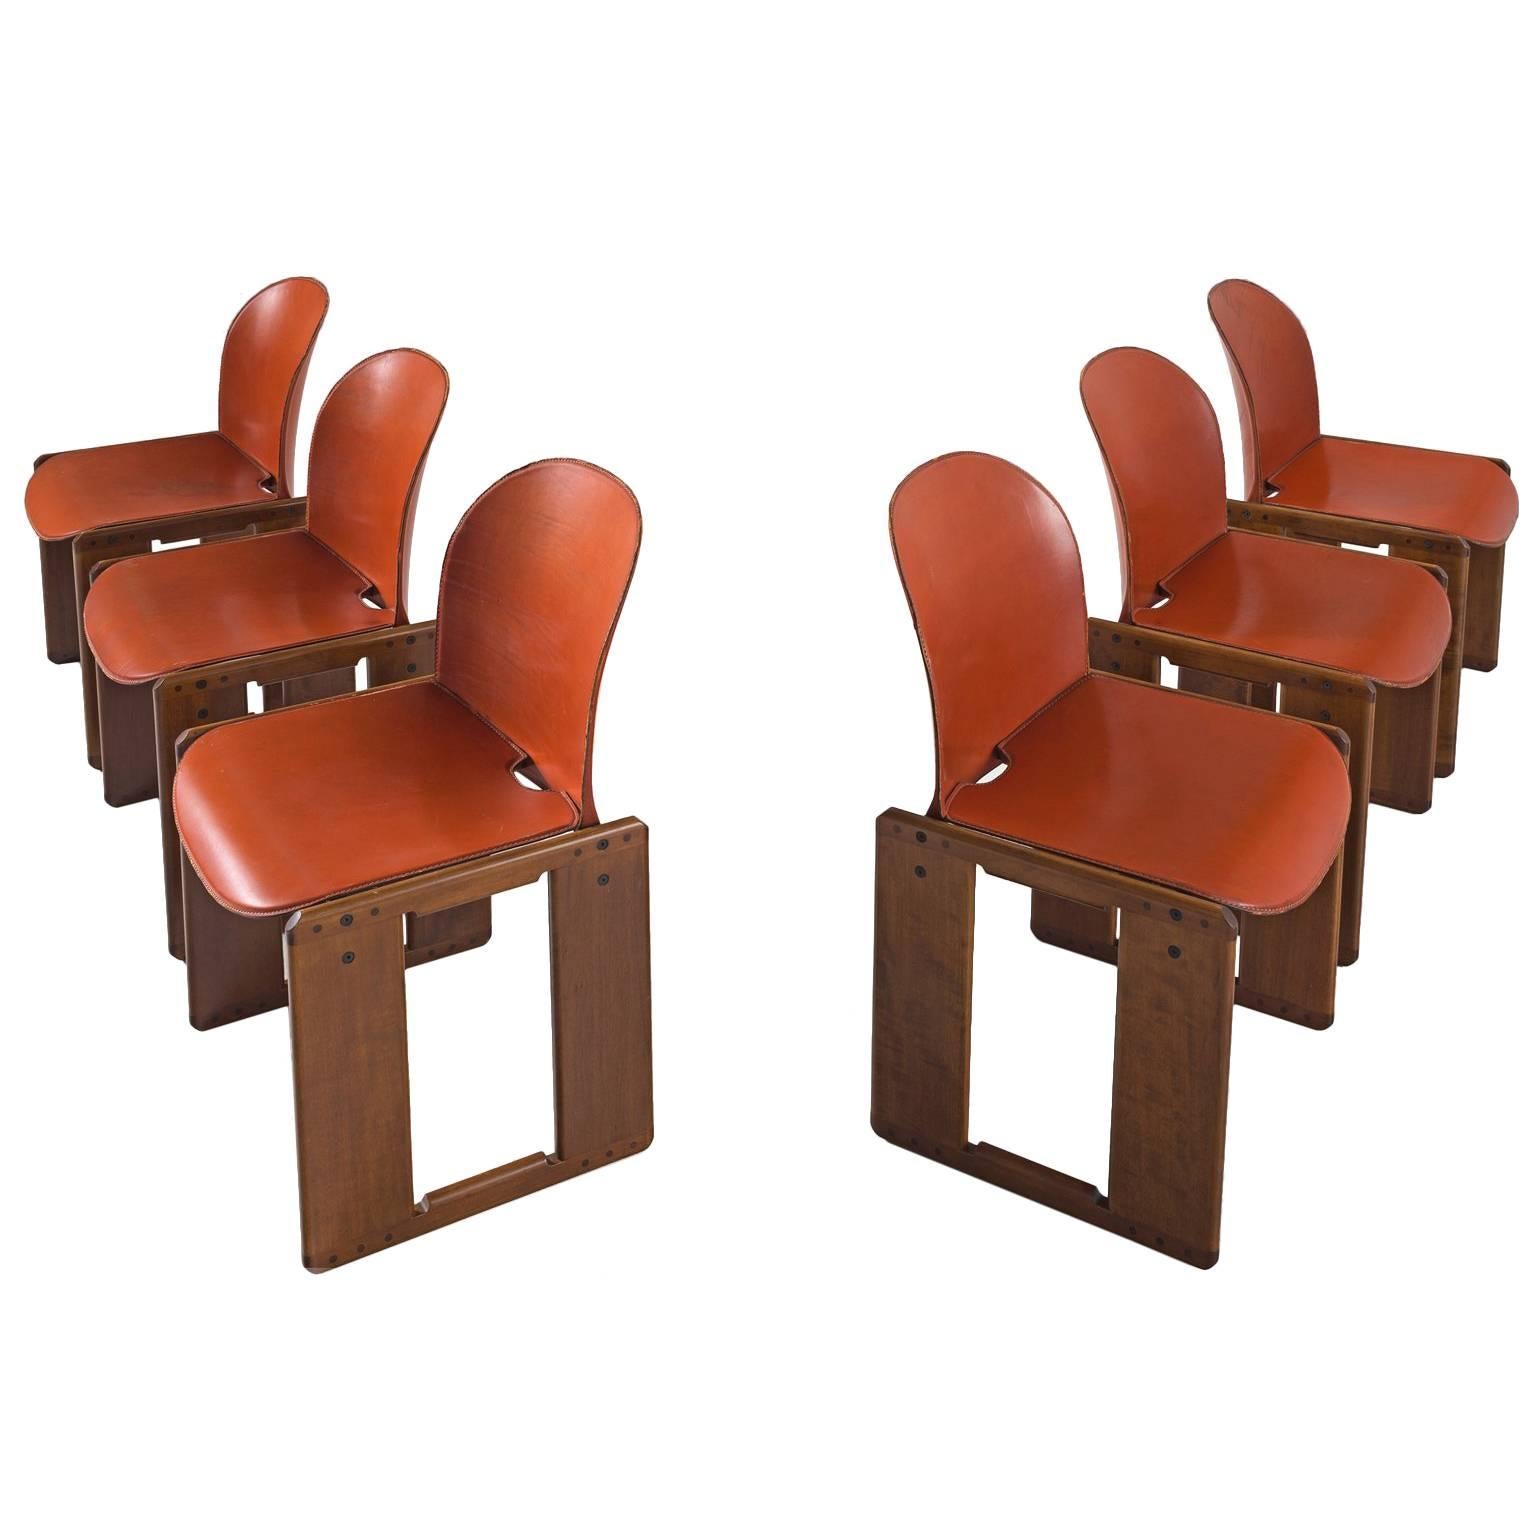 Dialogo Scarpa Chairs in Cognac Leather